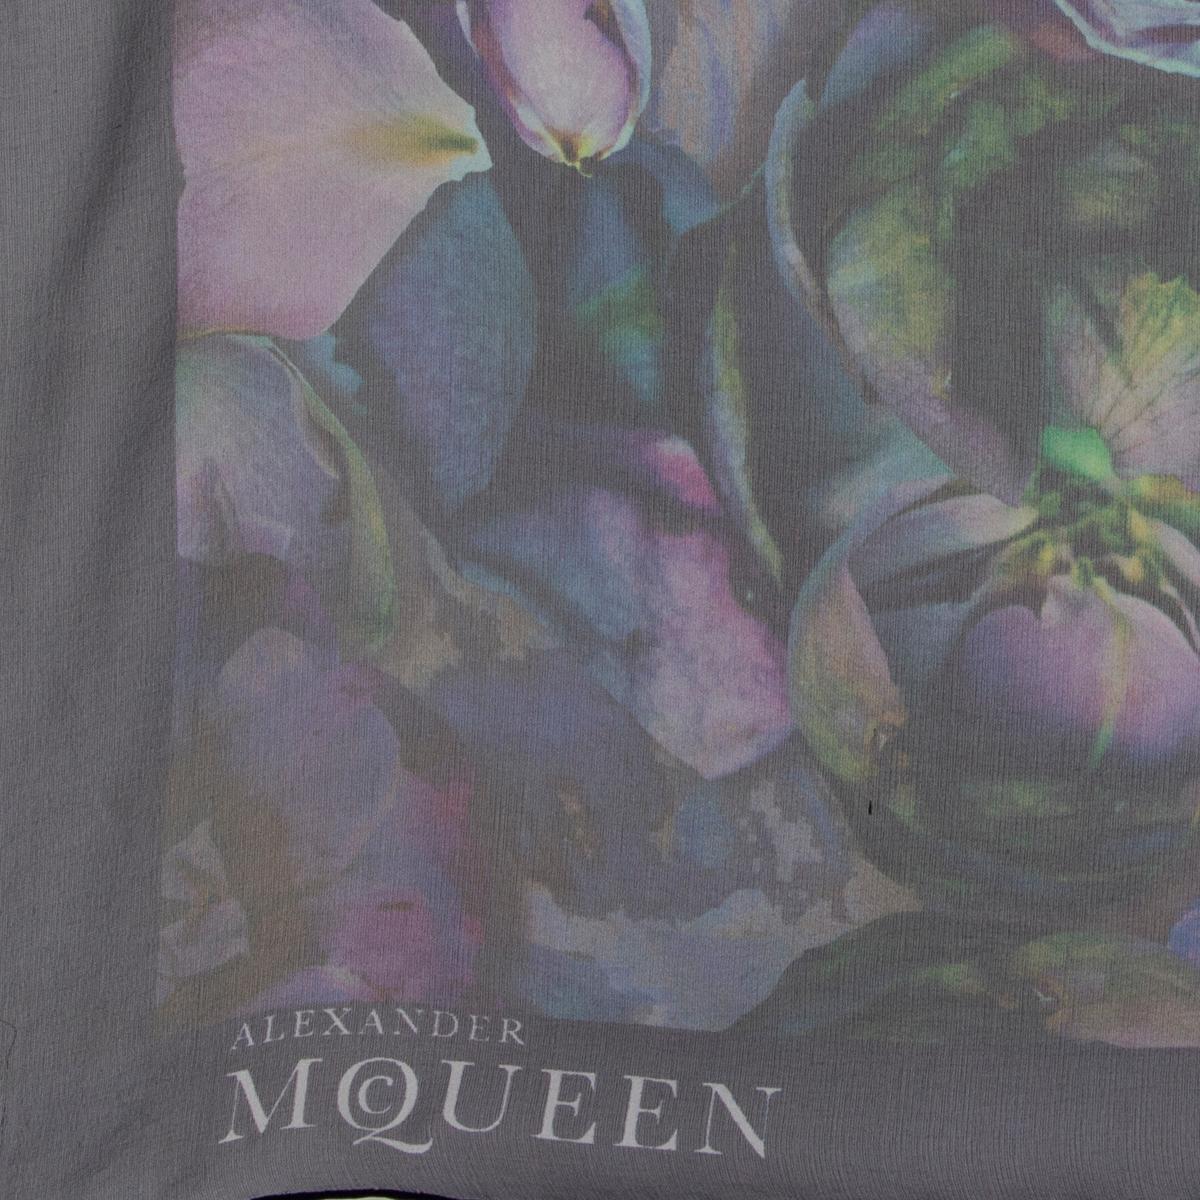 Alexander McQueen rose print chiffon scarf in purple silk (100%) with pink, blue and green details. Has been worn and is in excellent condition.

Width 138cm (53.8in)
Length 138cm (53.8in)